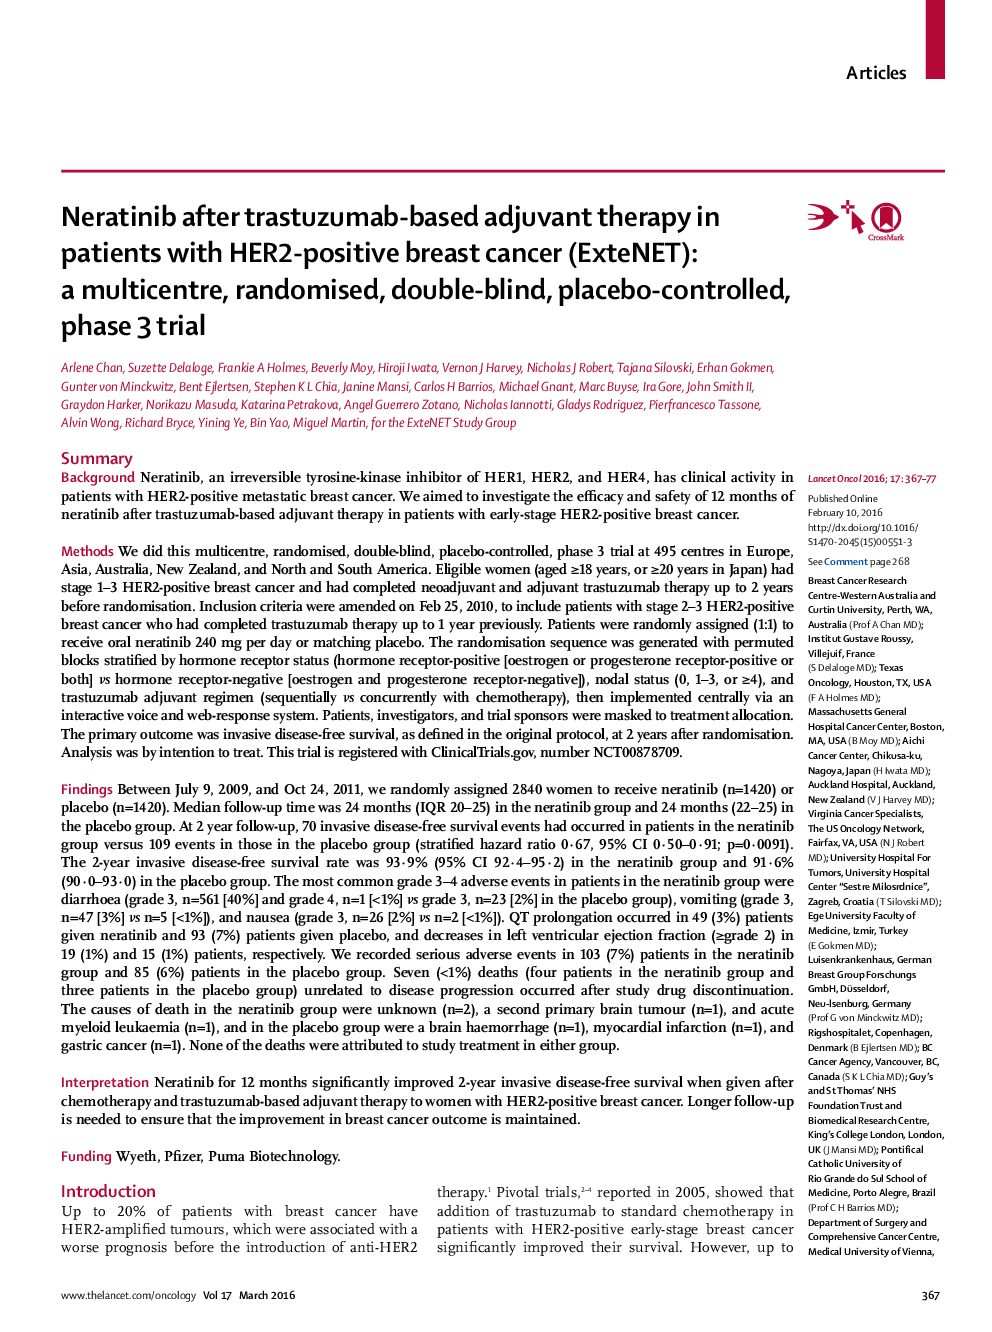 Neratinib after trastuzumab-based adjuvant therapy in patients with HER2-positive breast cancer (ExteNET): a multicentre, randomised, double-blind, placebo-controlled, phase 3 trial